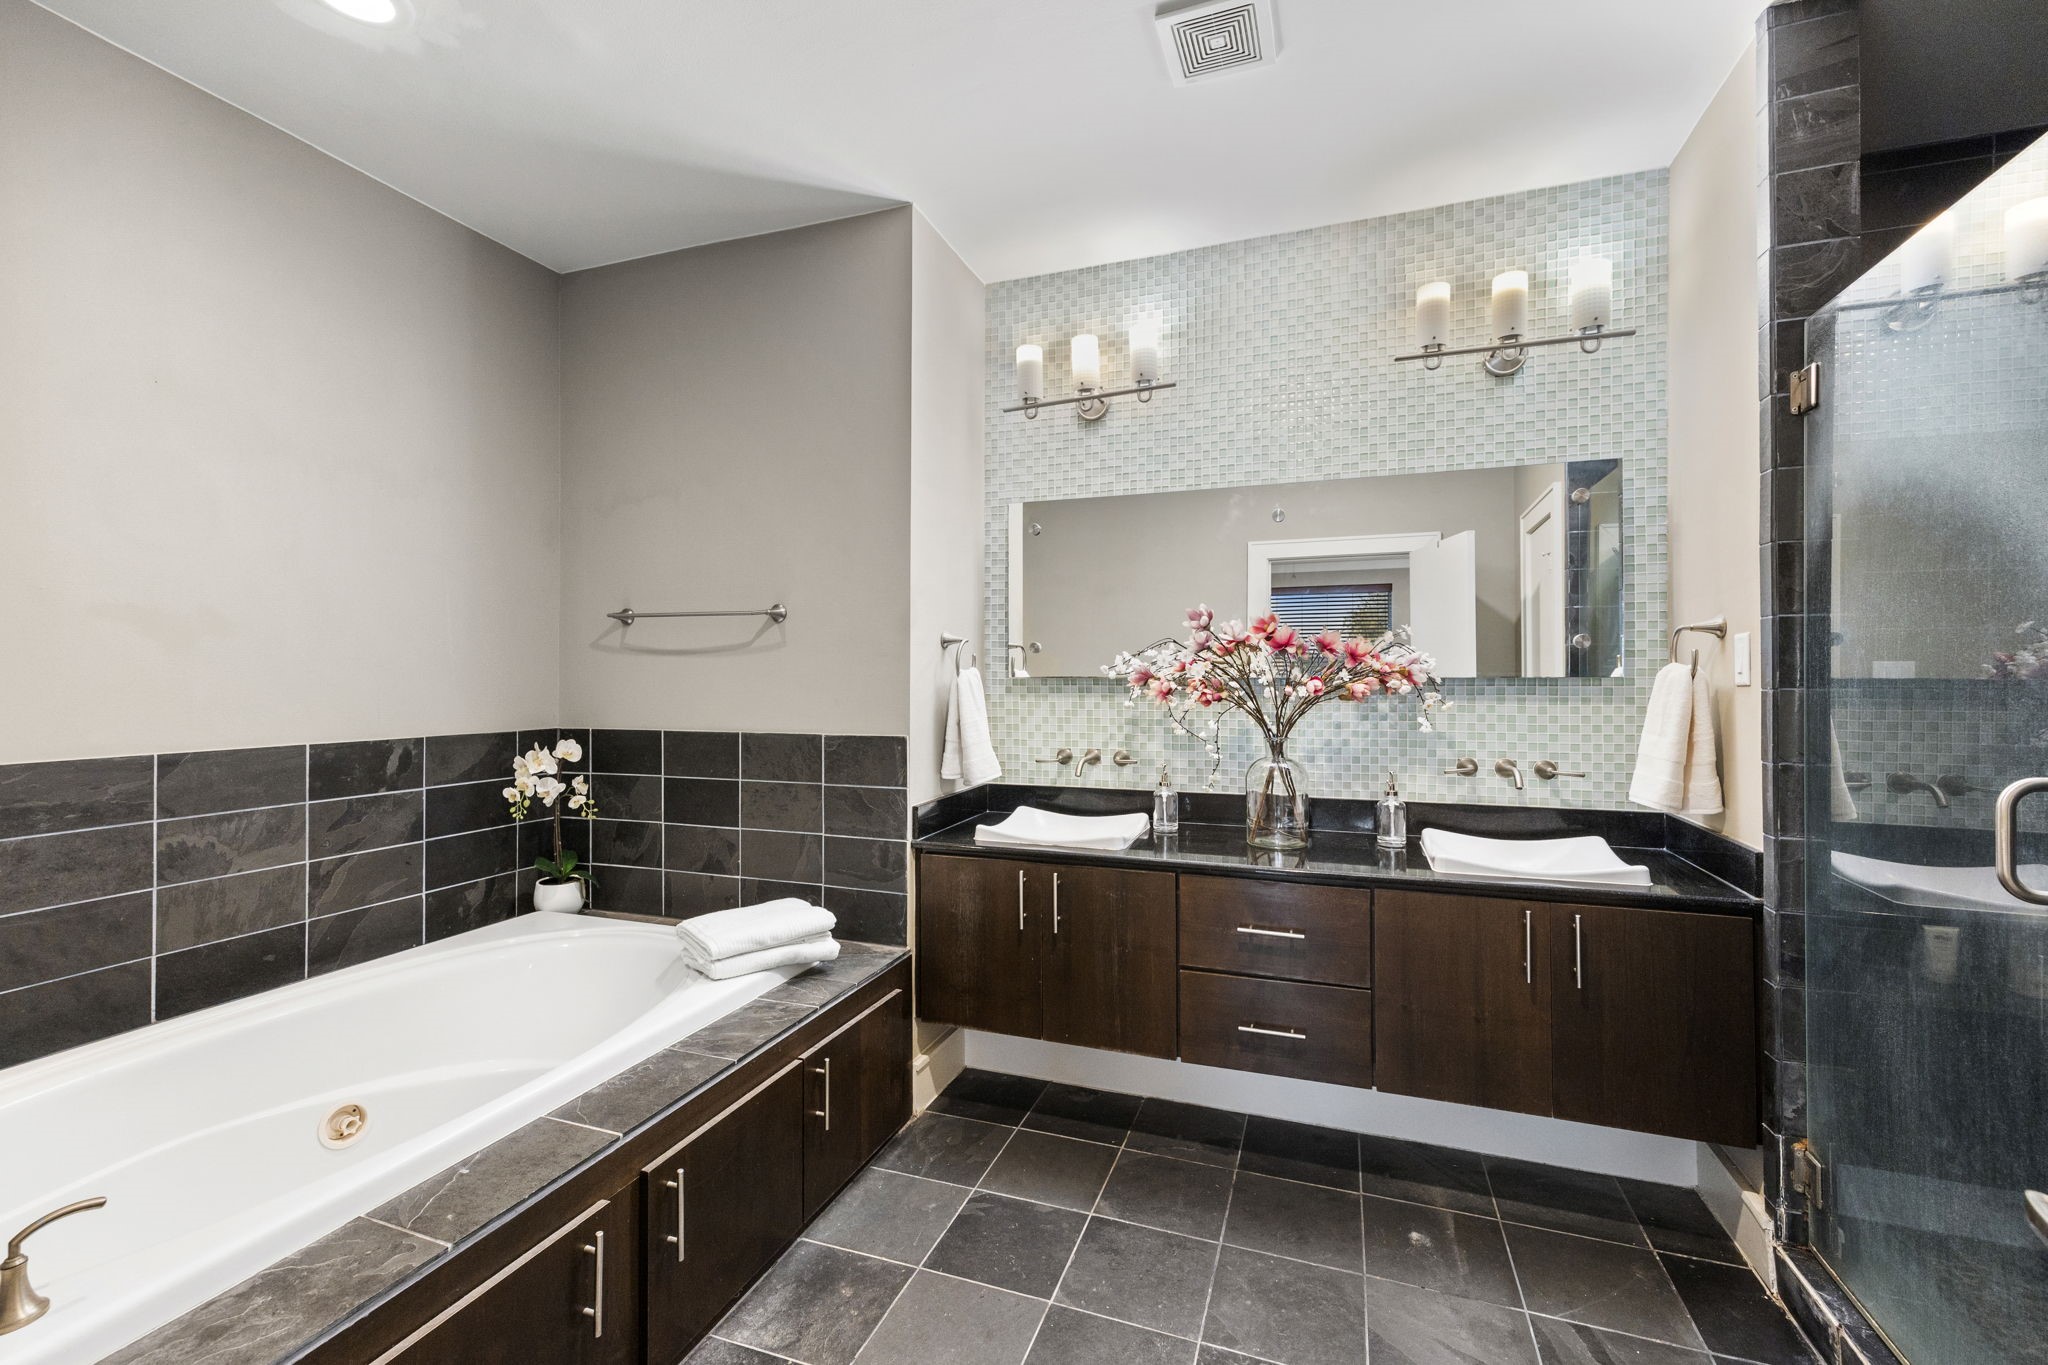 The Ensuite Primary Bath has Granite Countertops, Custom vanity featuring Dual Sinks, an Oversized Jetted Tub, and Tile Flooring! 322 Patterson St., Houston, TX  77007